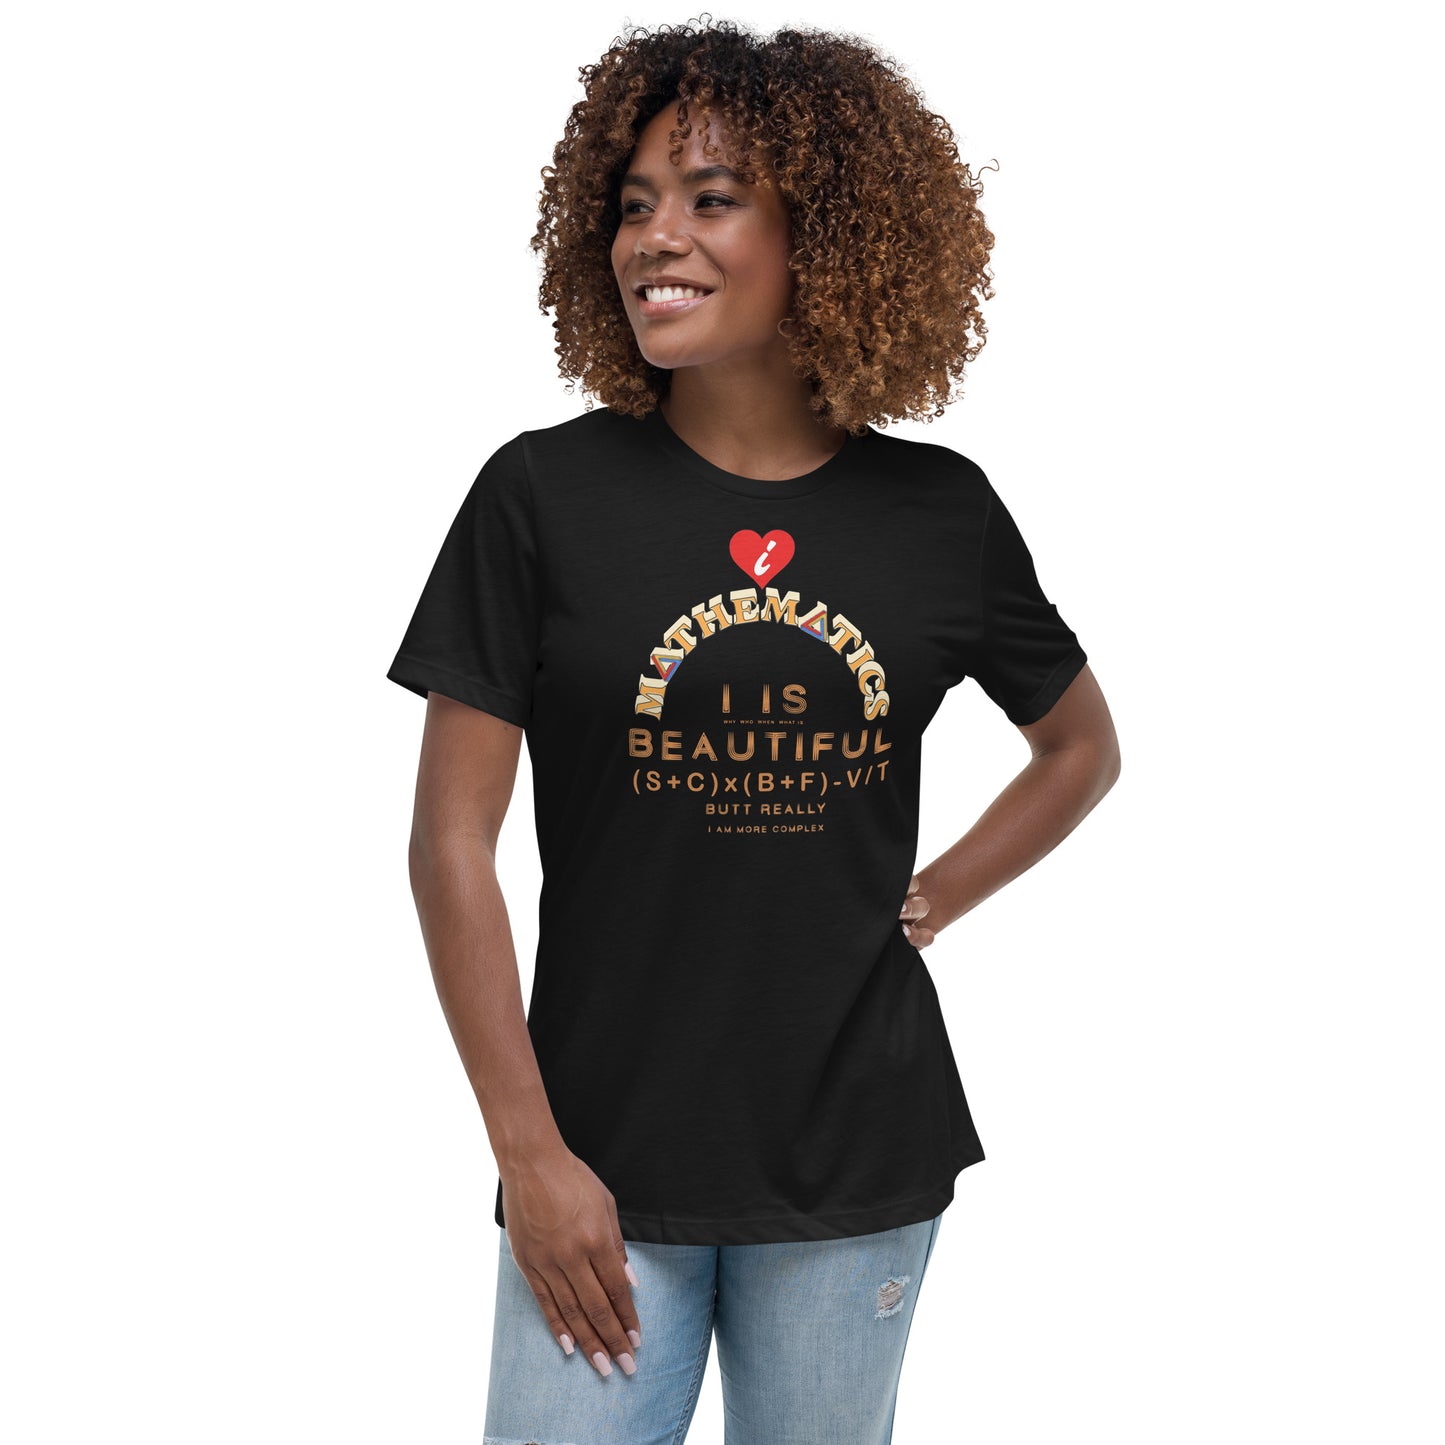 Women's Relaxed T-Shirt - I Love Maths, I is Beautiful I am complex, butt why?